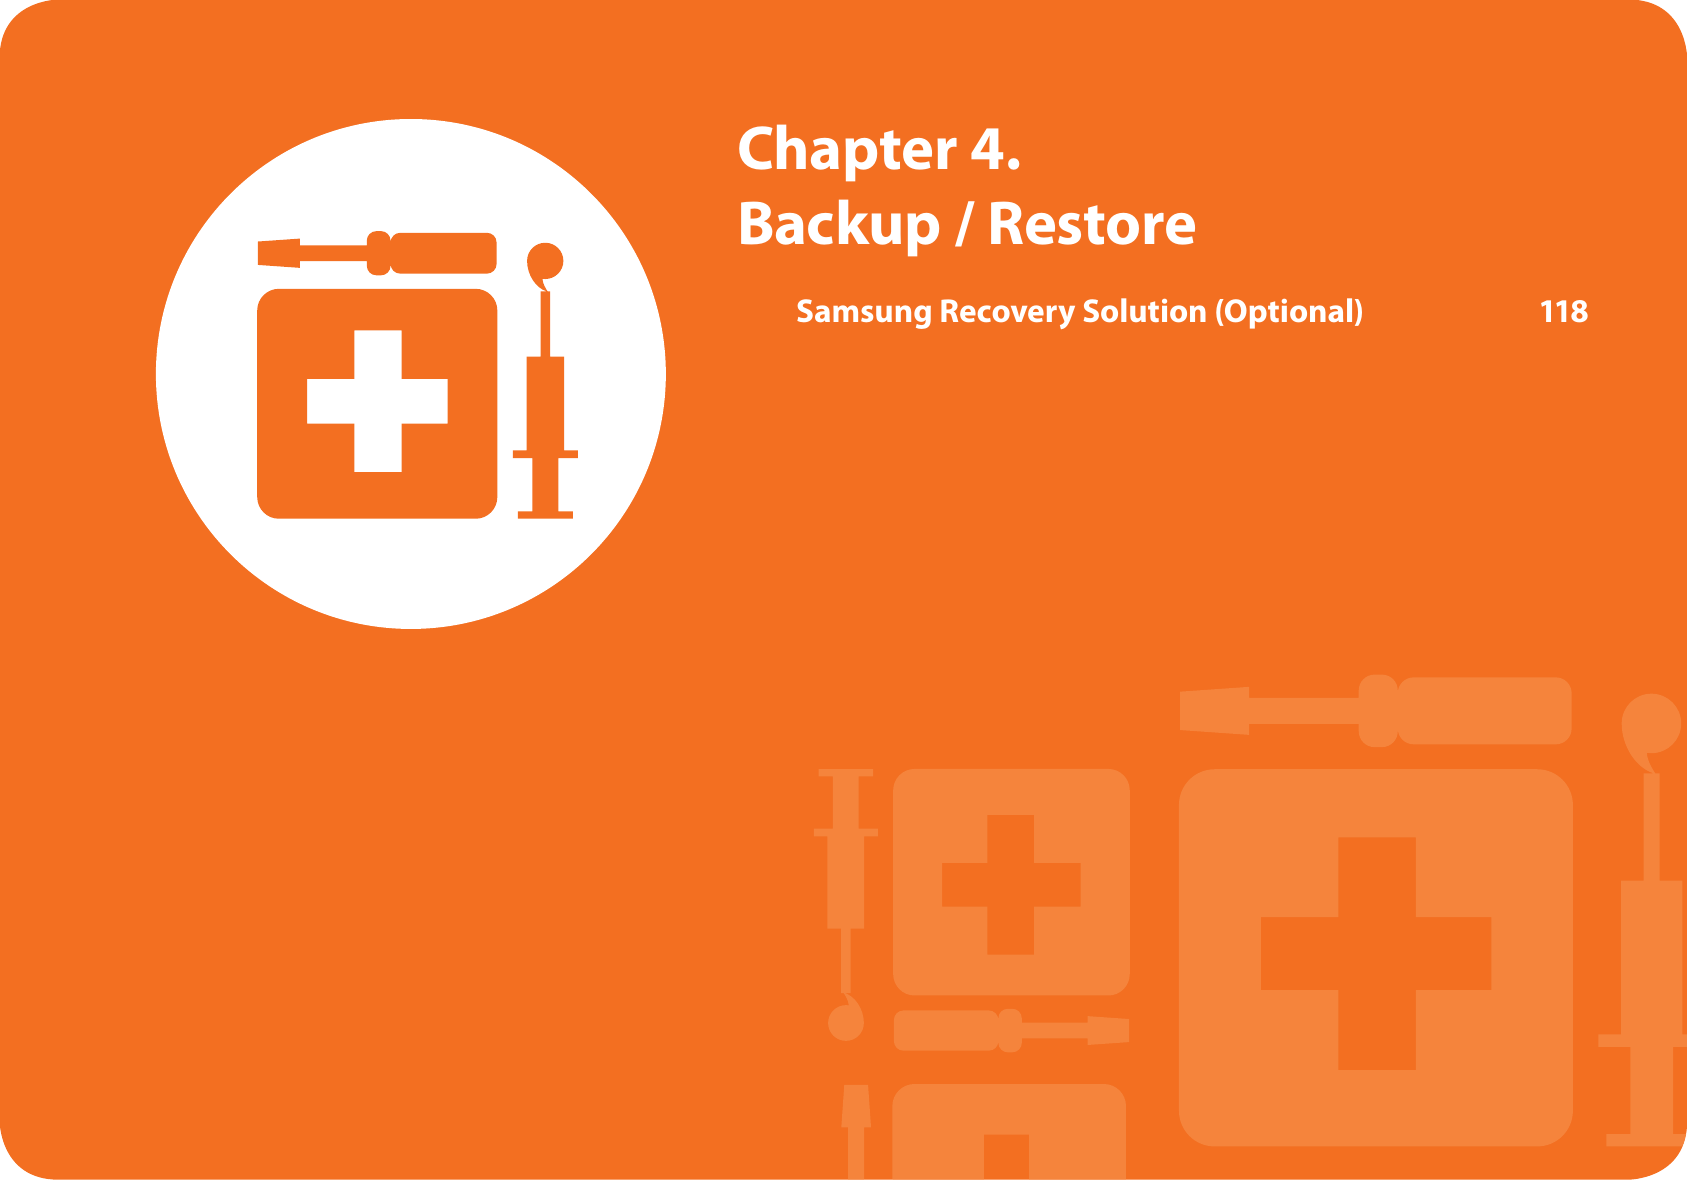  Chapter  4. Backup / RestoreSamsung Recovery Solution (Optional)  118